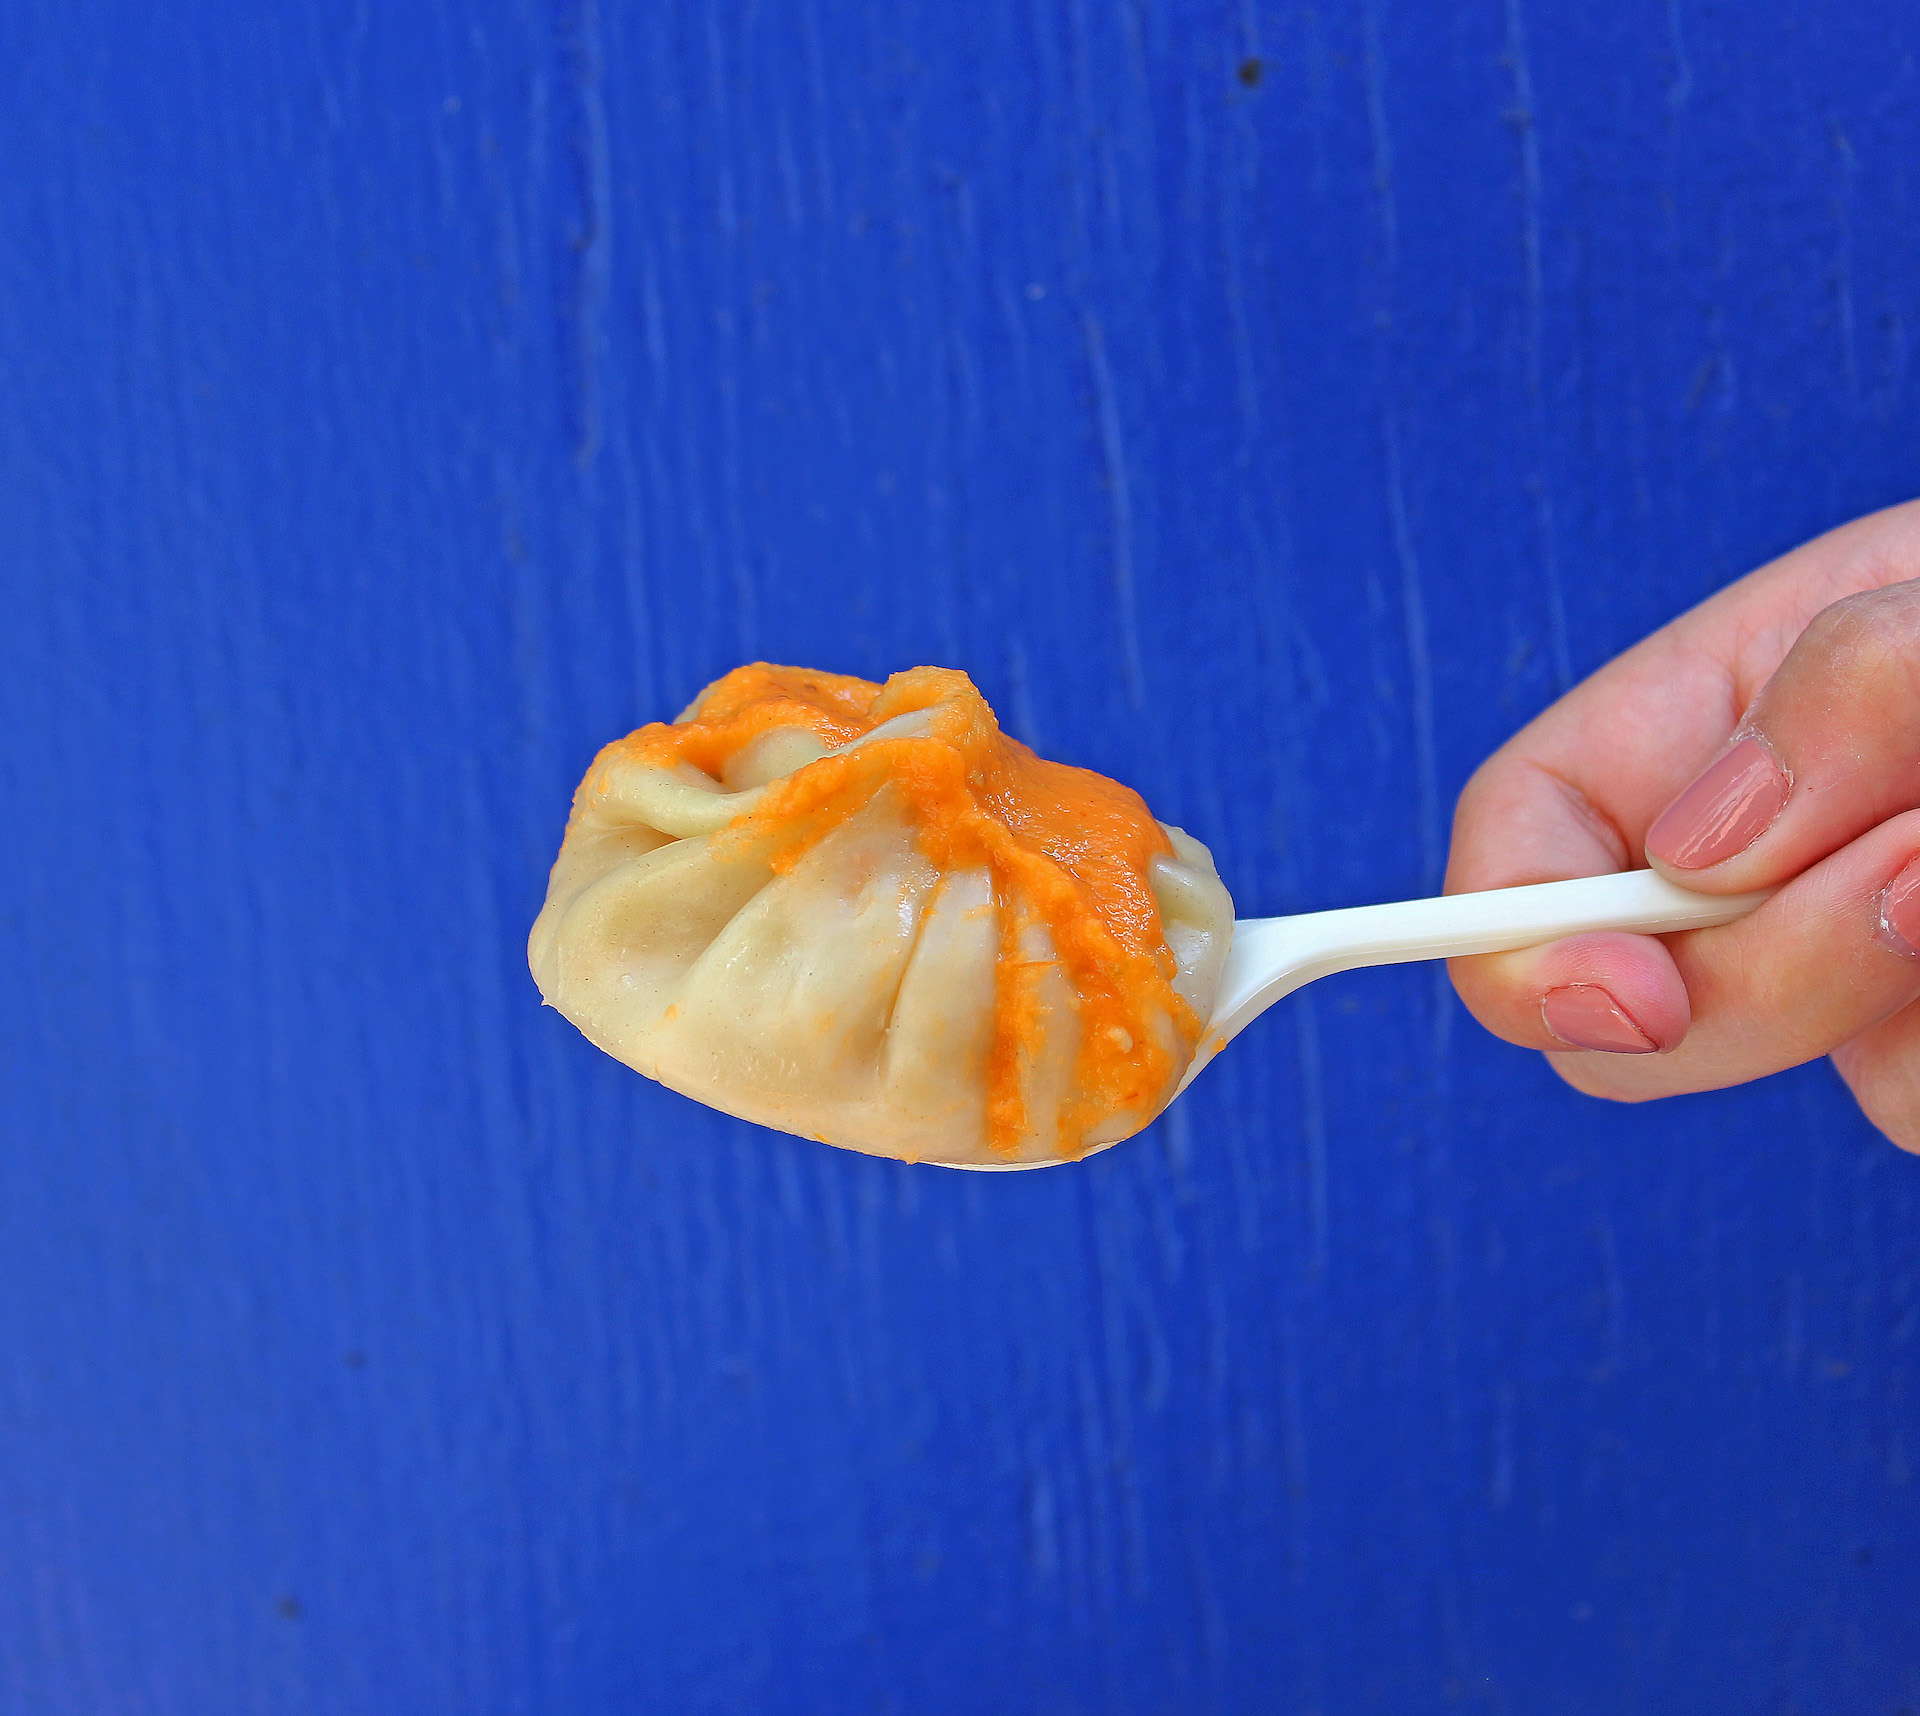 Bini's momos are available with chicken, turkey, and vegetable fillings.